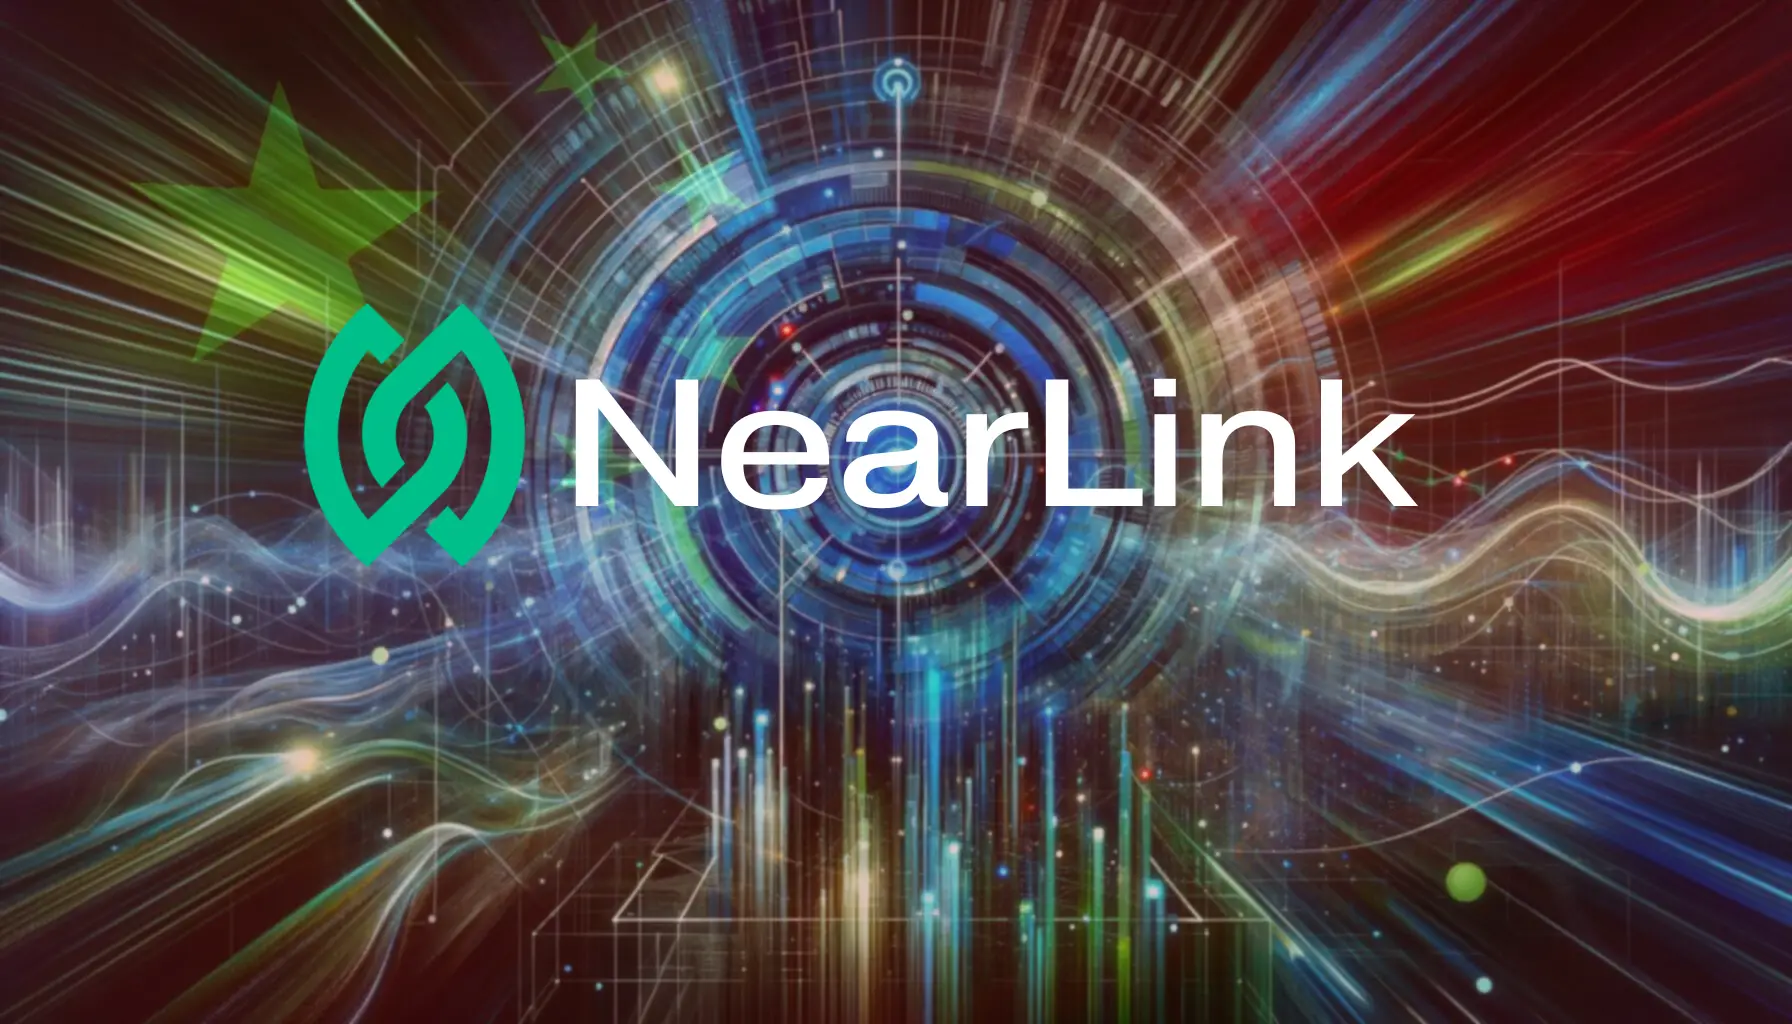 Nearlink - China's answer to Bluetooth and WiFi